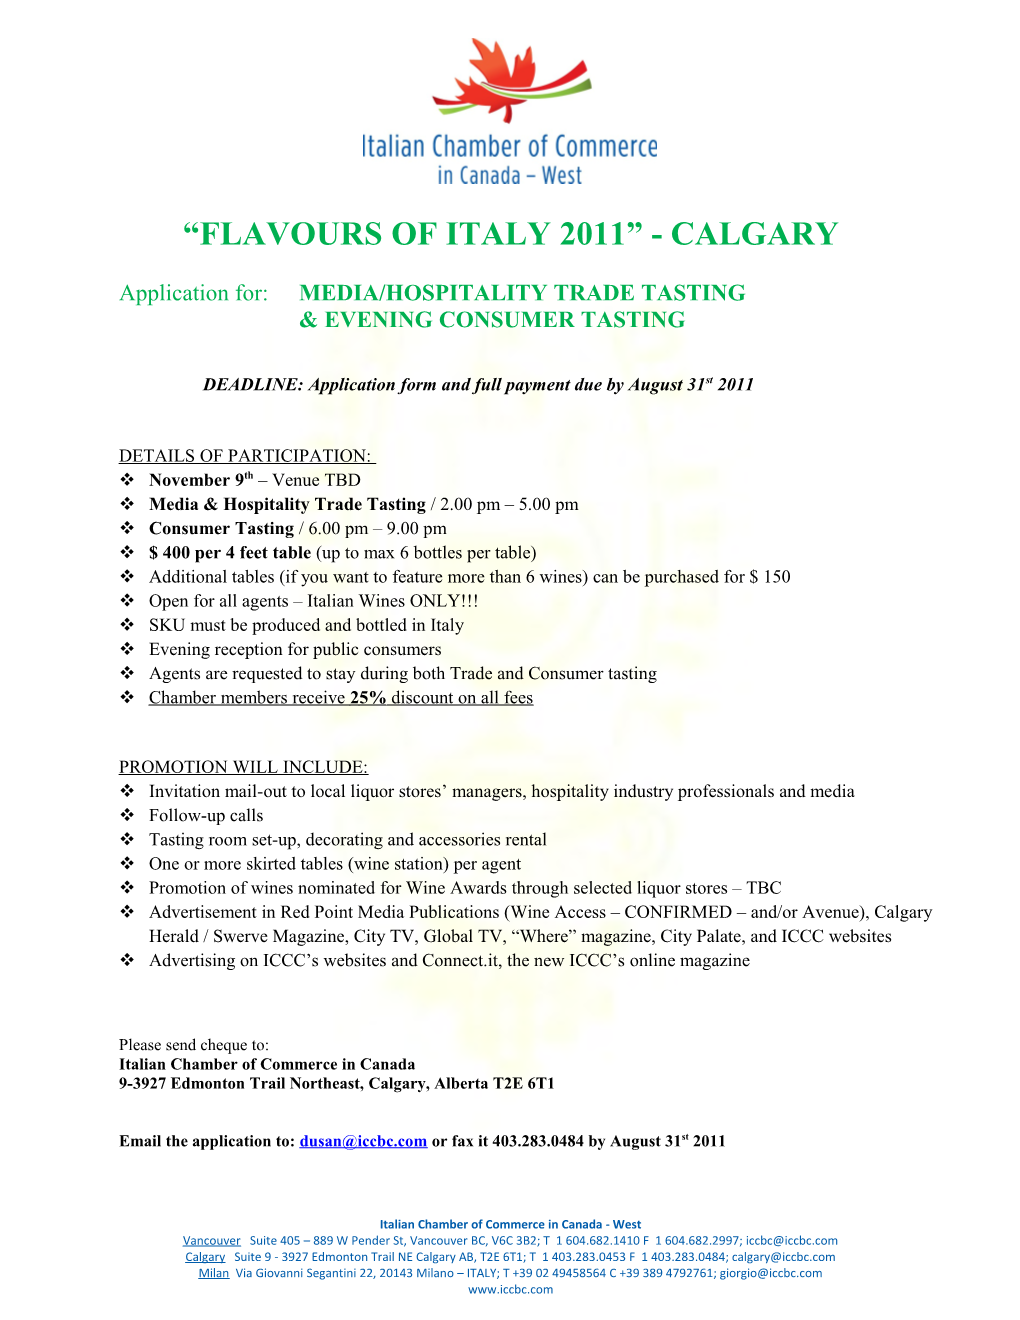 Flavours of Italy 2011 - Calgary